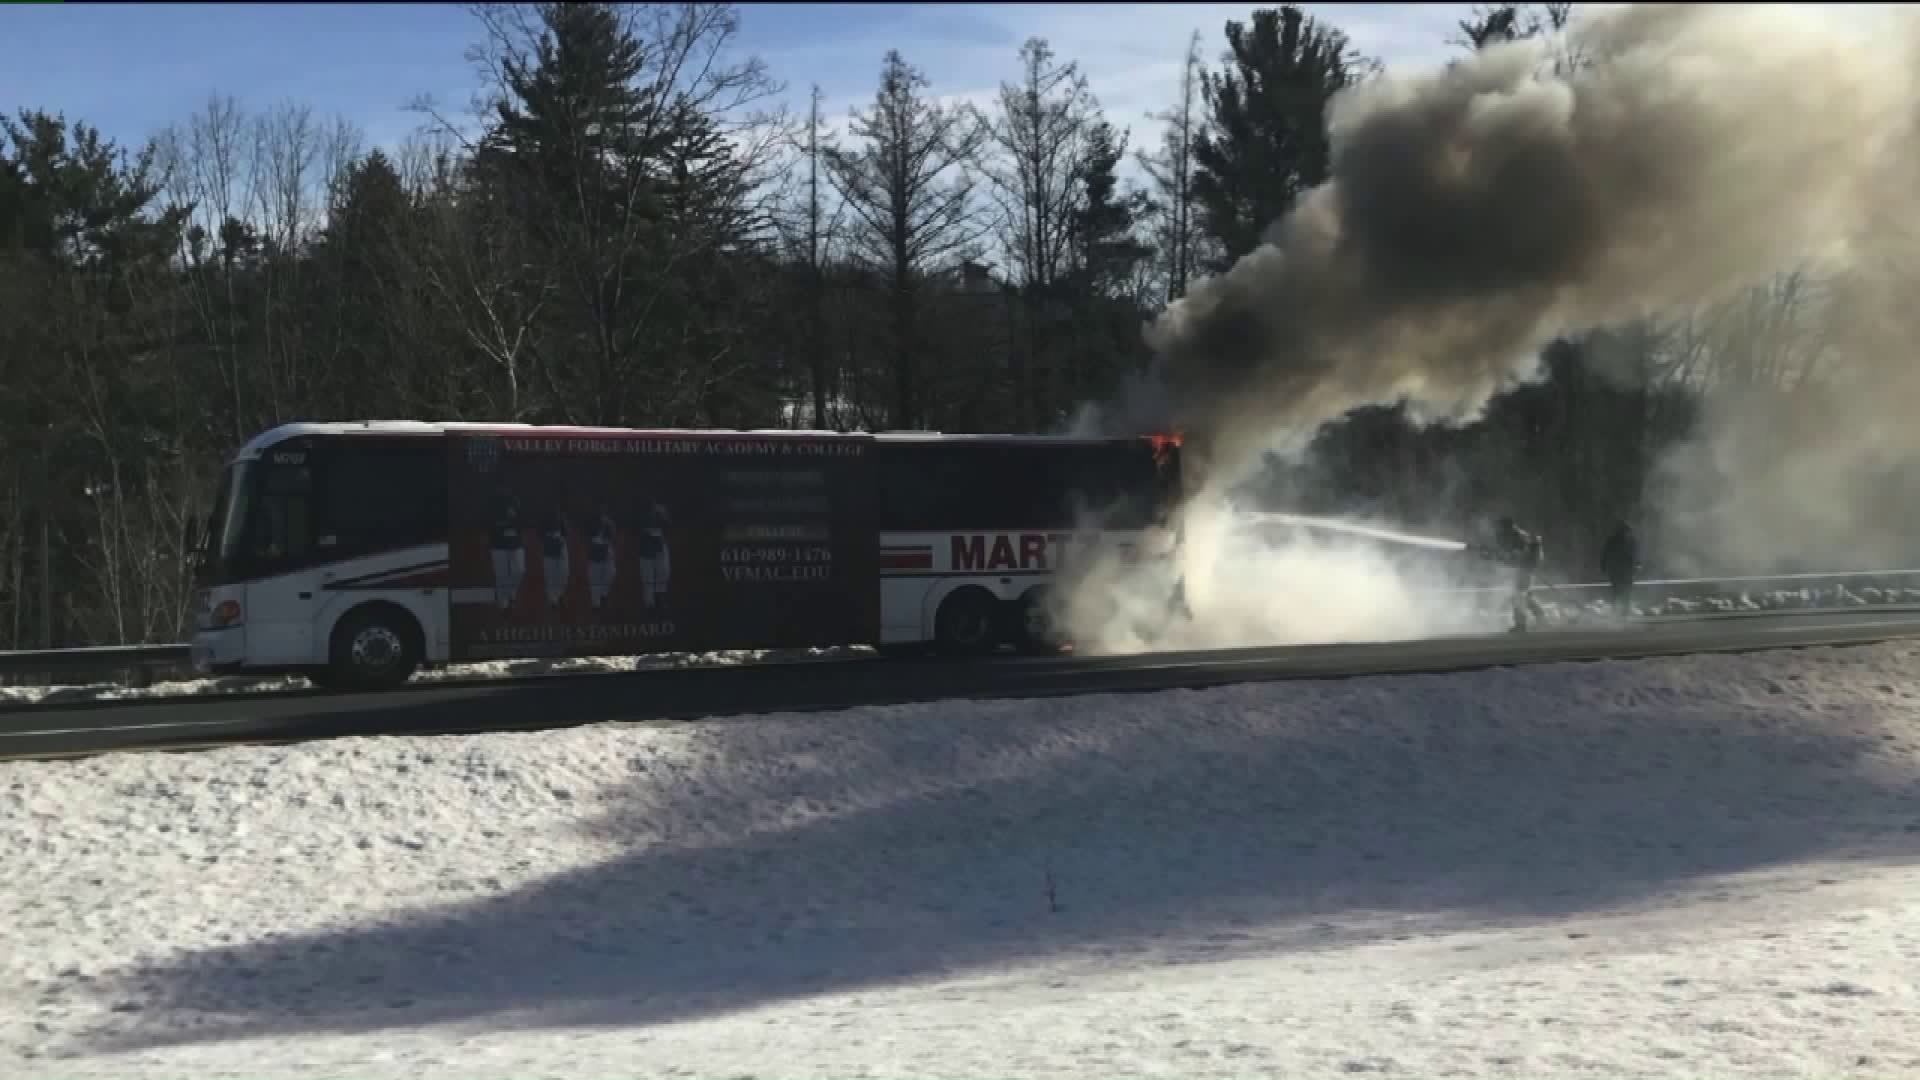 Bus Fire Slows Traffic in Interstate 80